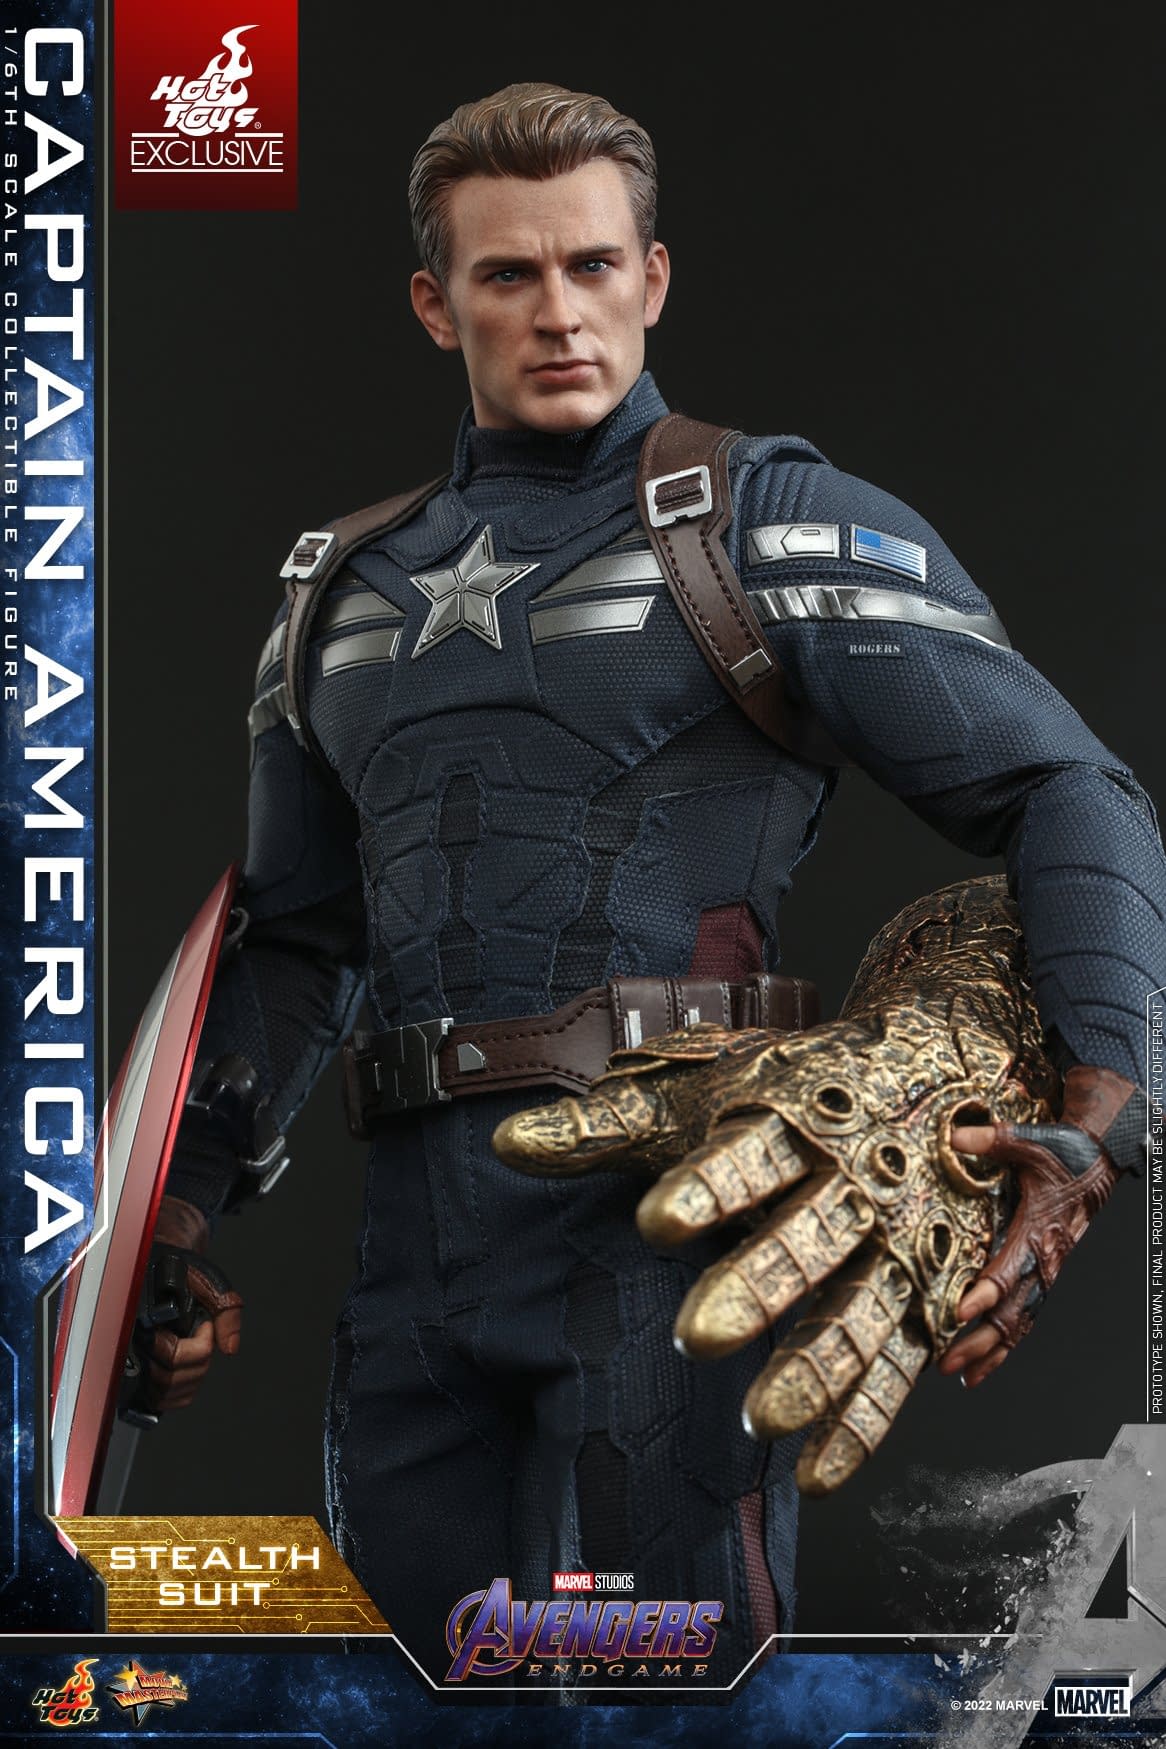 Captain America Suits Up with New Endgame Figure from Hot Toys